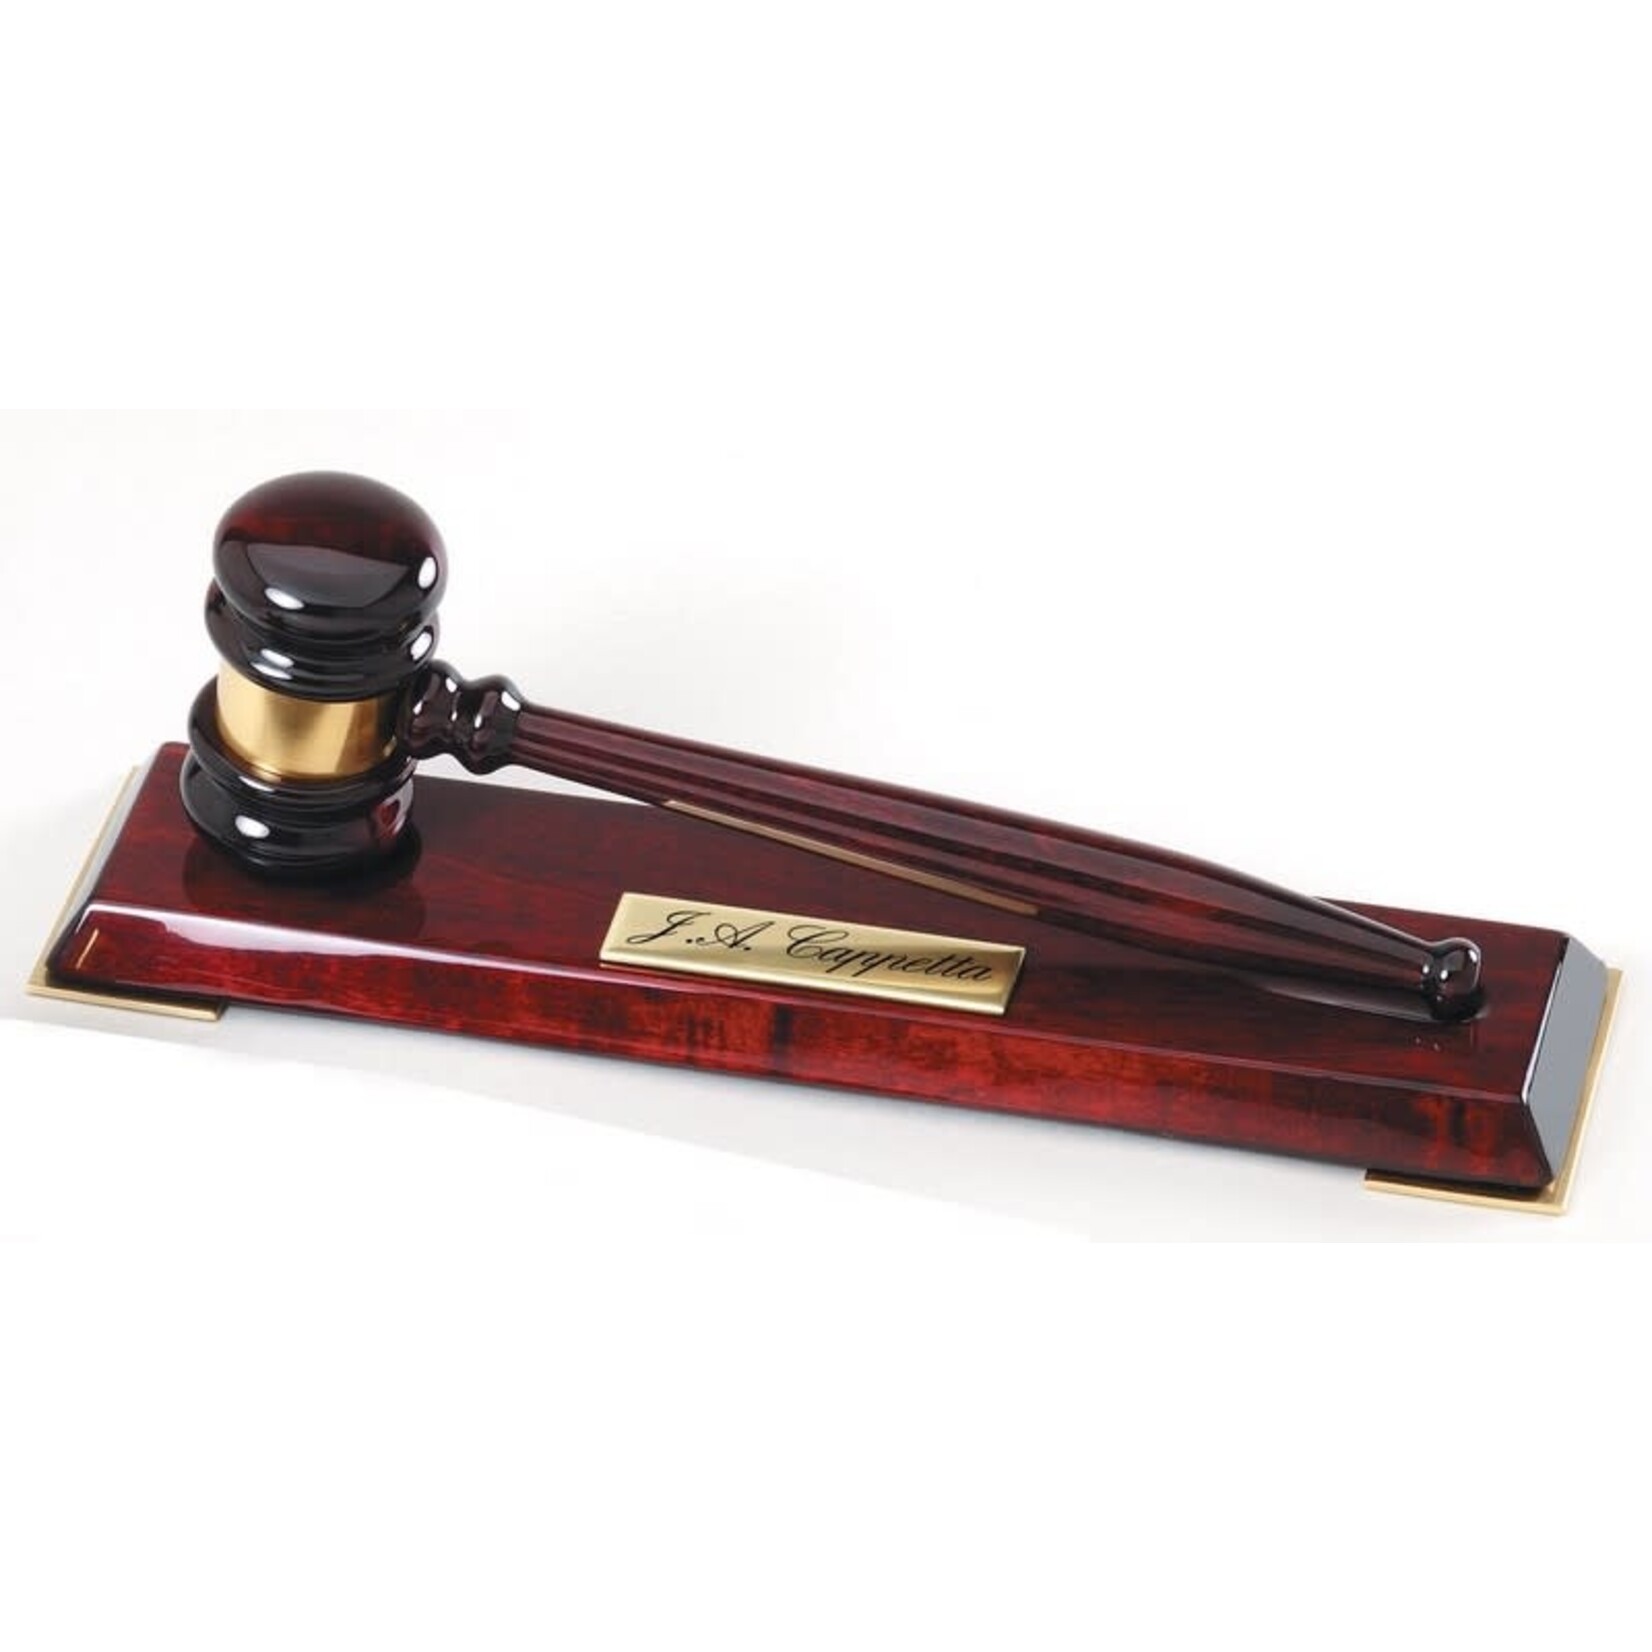 Marco GV138 Gavel on Rosewood plaque